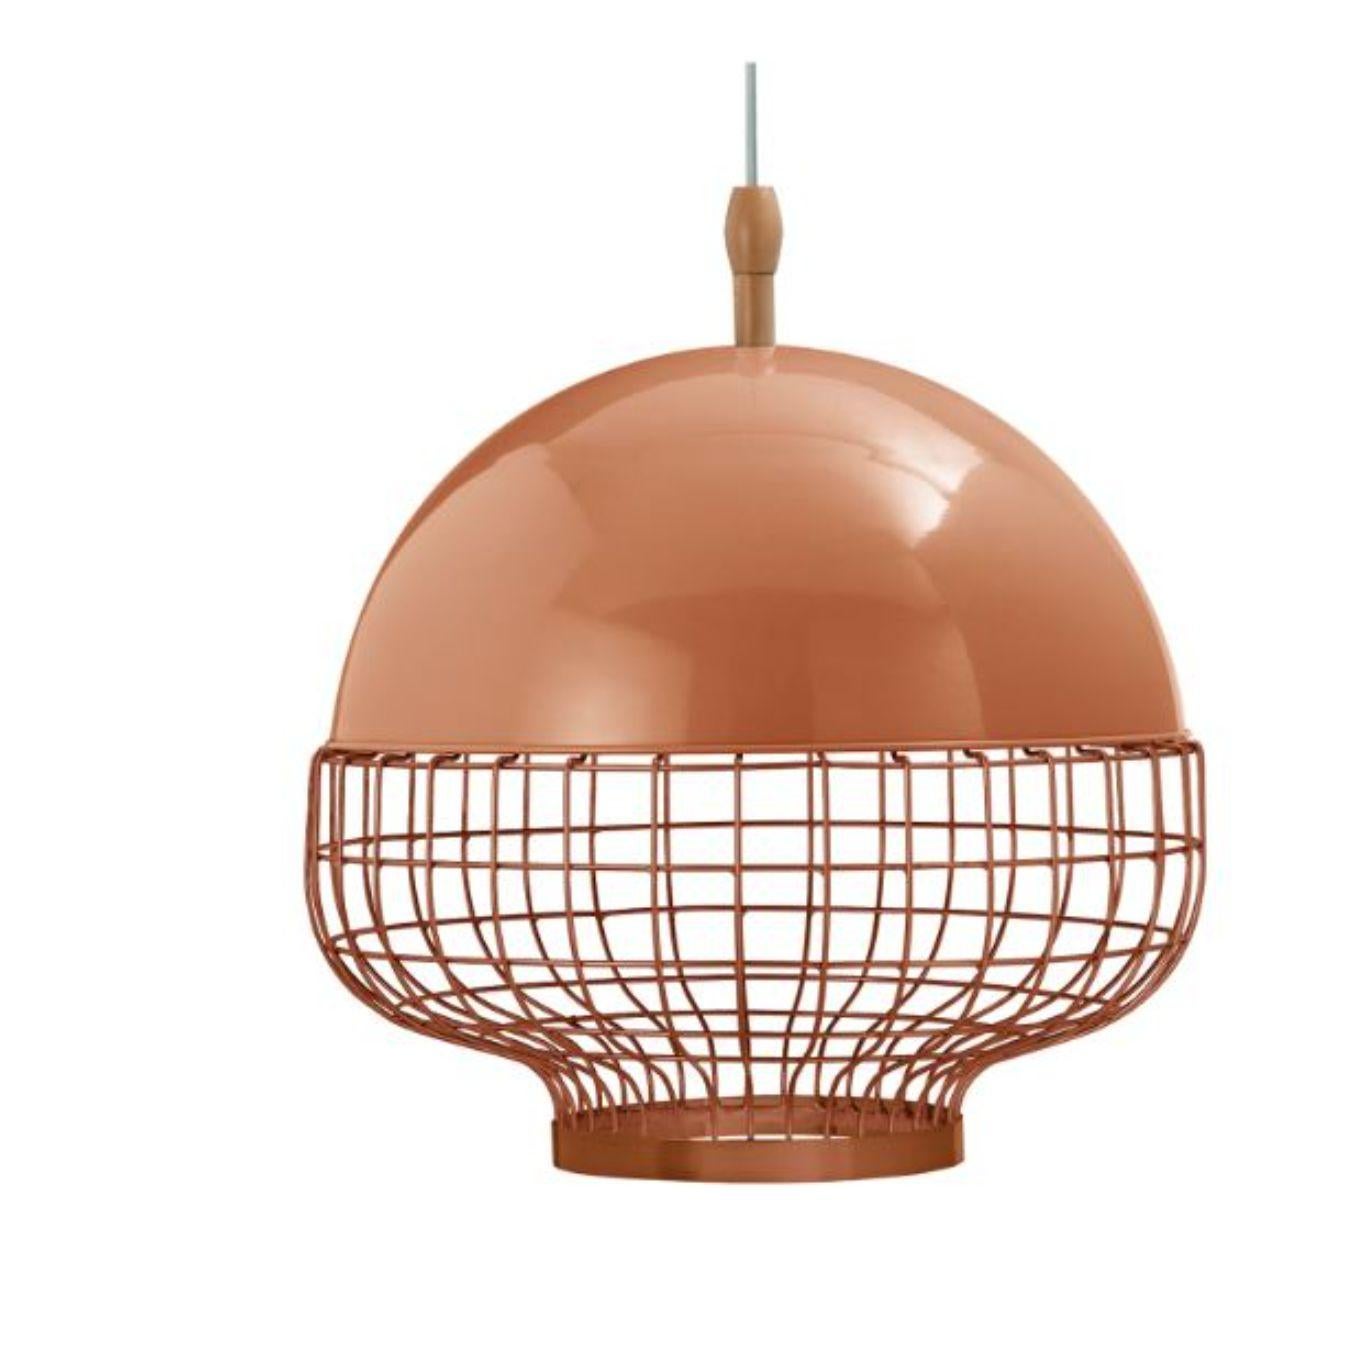 Salmon Magnolia I suspension lamp with copper ring by Dooq.
Dimensions: W 65 x D 65 x H 57 cm.
Materials: lacquered metal, polished or brushed metal, copper.
Also available in different colours and materials.

Information:
230V/50Hz
E27/1x20W